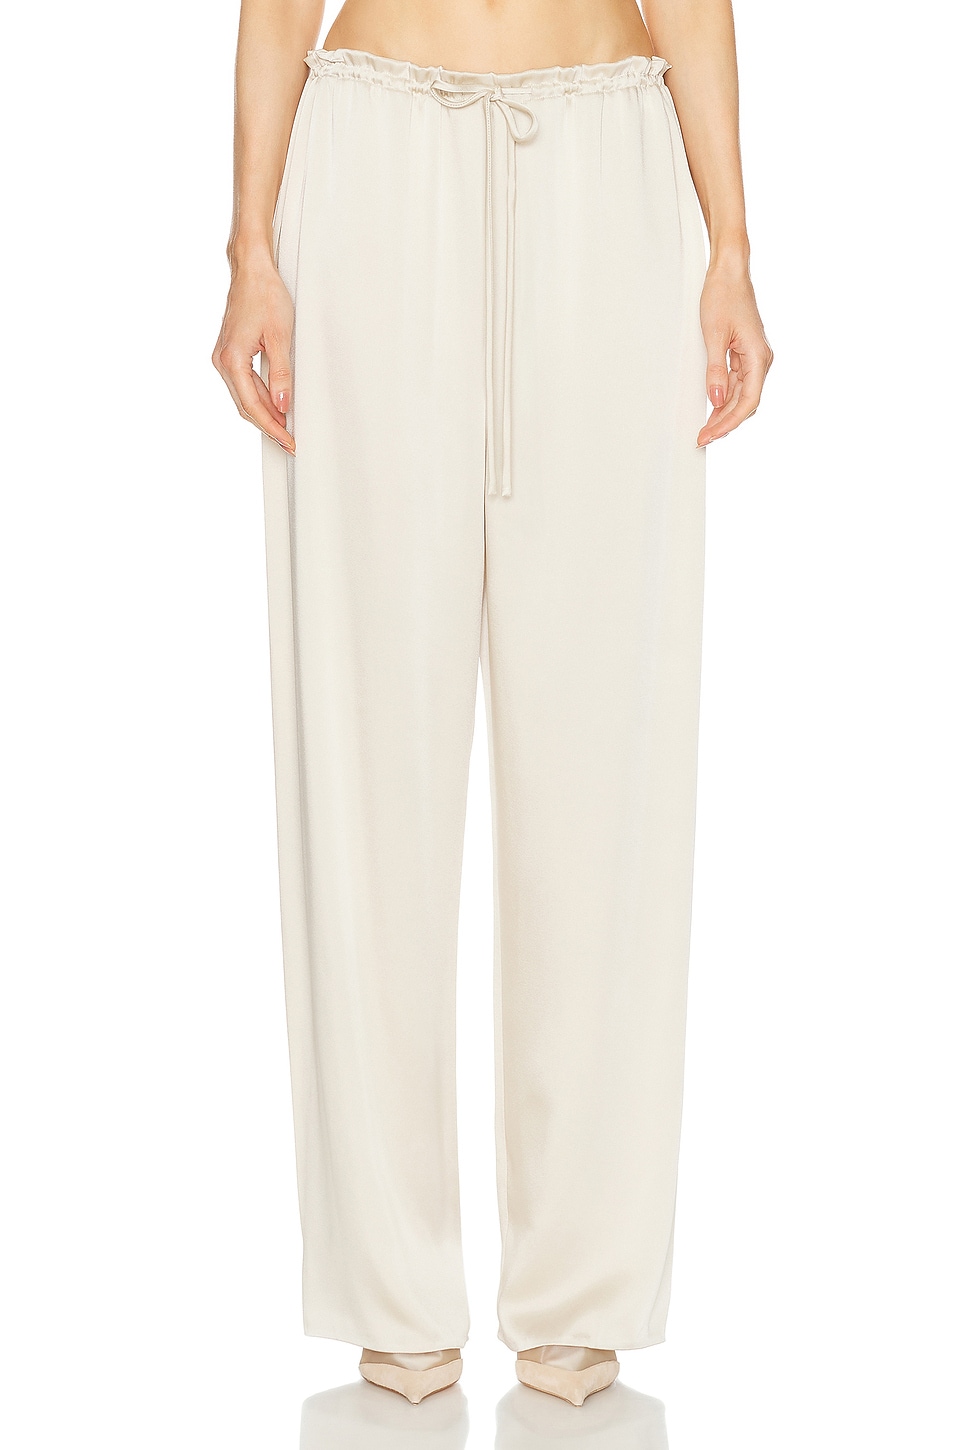 Image 1 of Lapointe Doubleface Satin Drawstring Side Pocket Pant in Sand